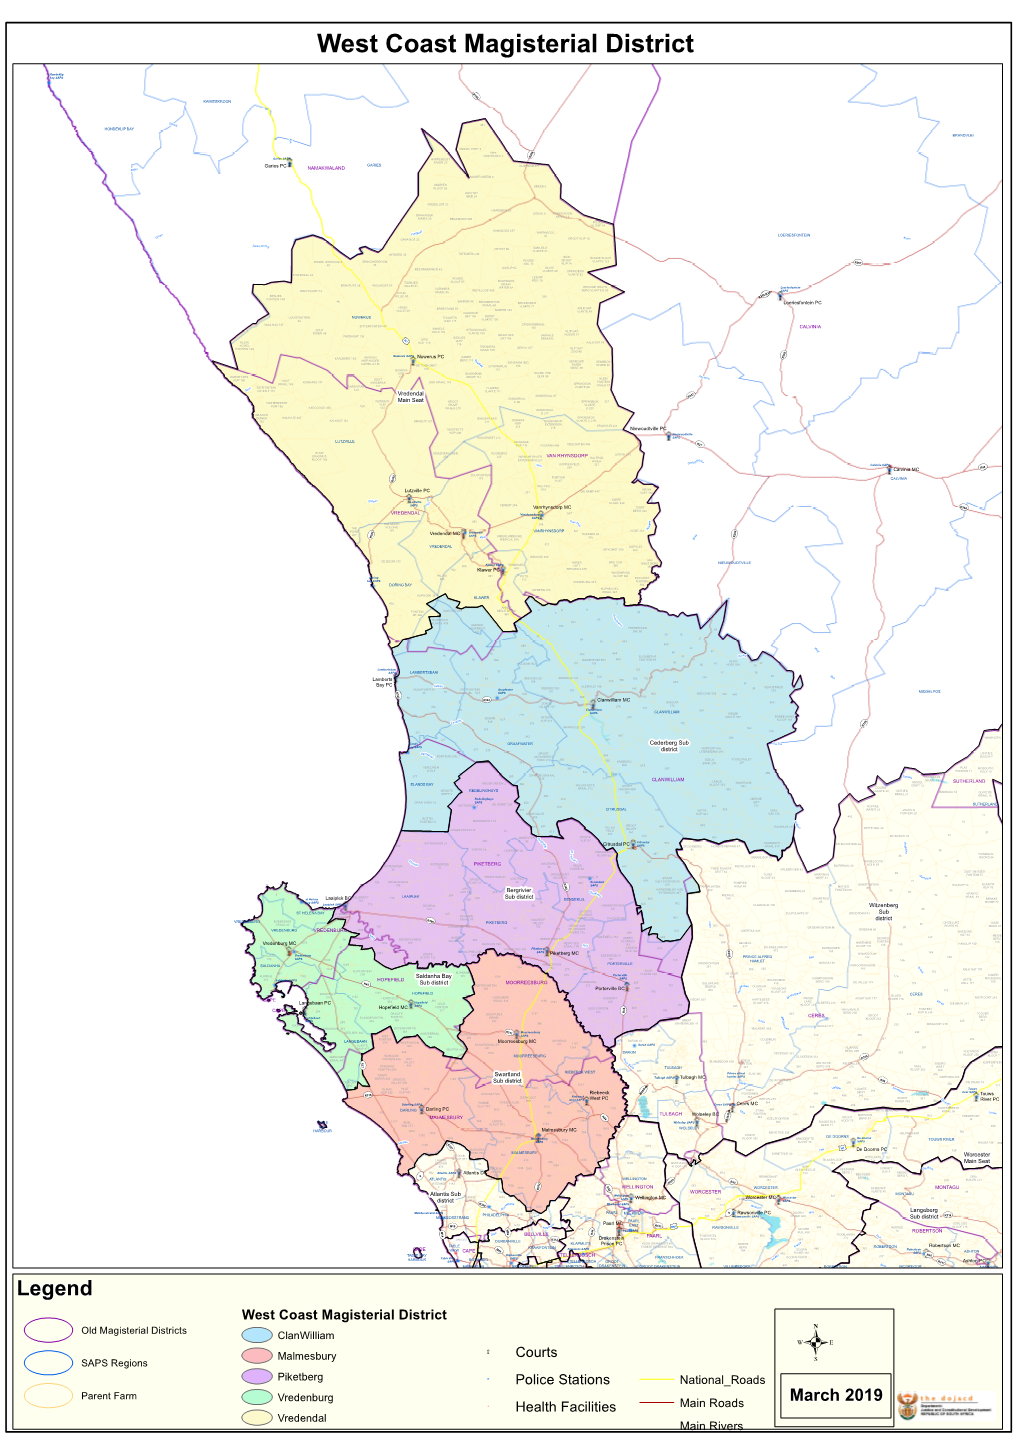 West Coast Magisterial District